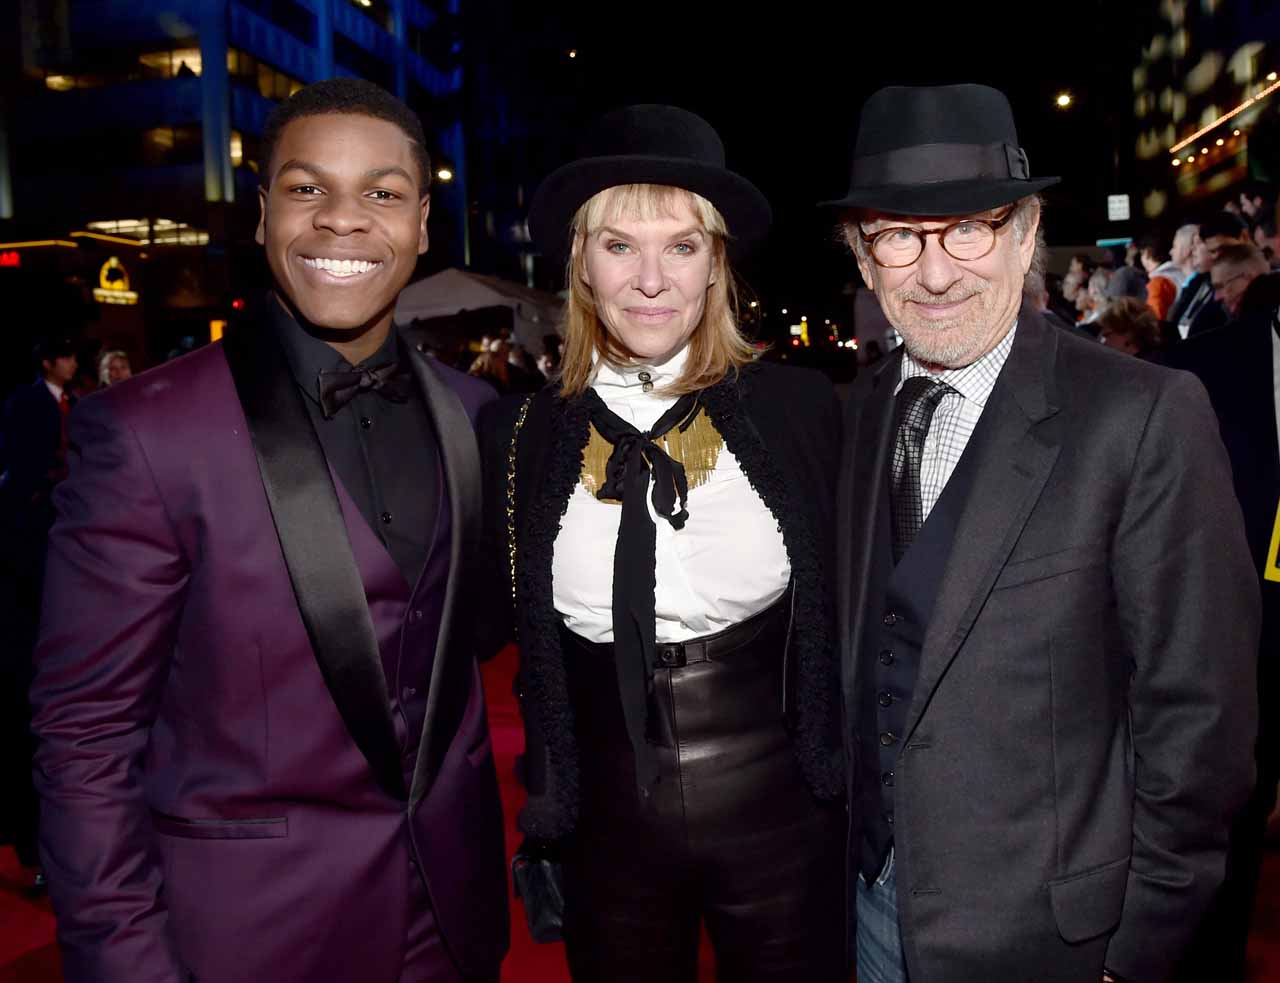 HOLLYWOOD, CA - DECEMBER 14:  (L-R) Actors John Boyega, Kate Capshaw and director Steven Spielberg attend the World Premiere of ?Star Wars: The Force Awakens? at the Dolby, El Capitan, and TCL Theatres on December 14, 2015 in Hollywood, California.  (Photo by Alberto E. Rodriguez/Getty Images for Disney) *** Local Caption *** John Boyega;Kate Capshaw;Steven Spielberg